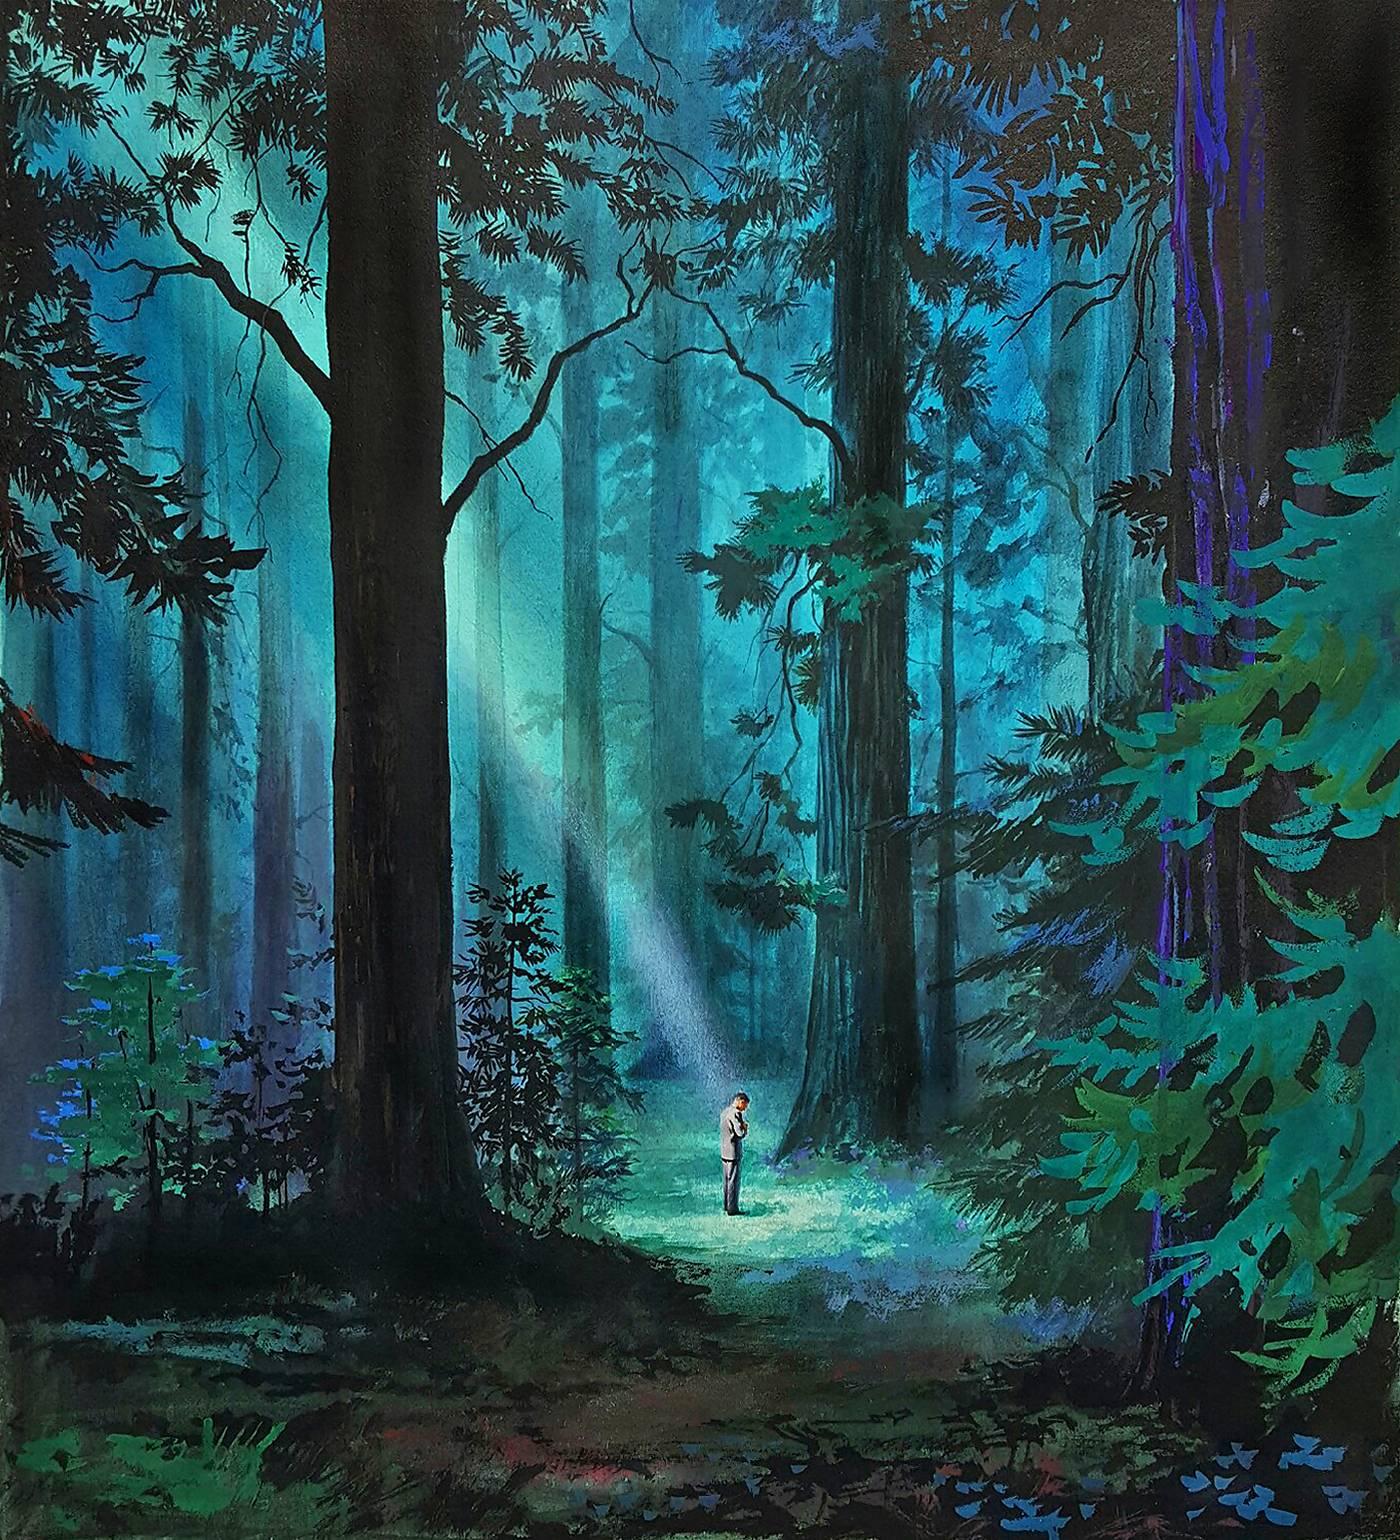 A ray of light in the forest - Surreal Man in Surreal Landscape 